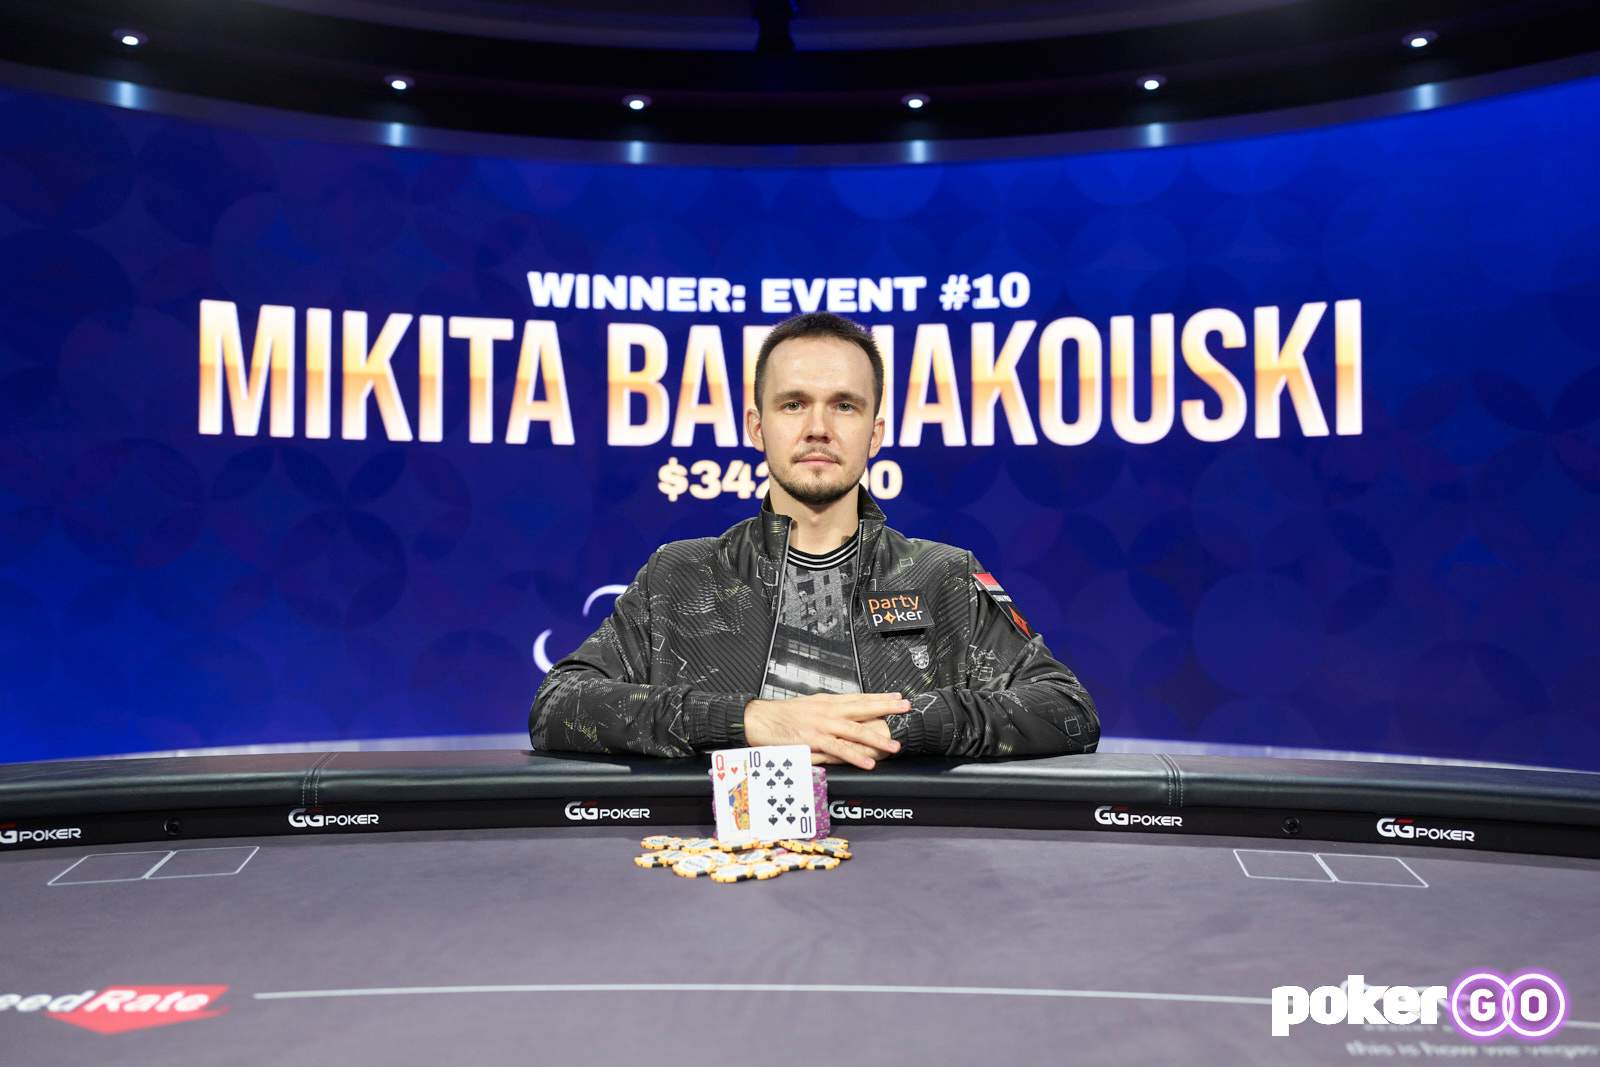 Mikita Badziakouski Wins Event #10: $25,000 NL Hold’em at the 2021 Poker Masters for $342,000